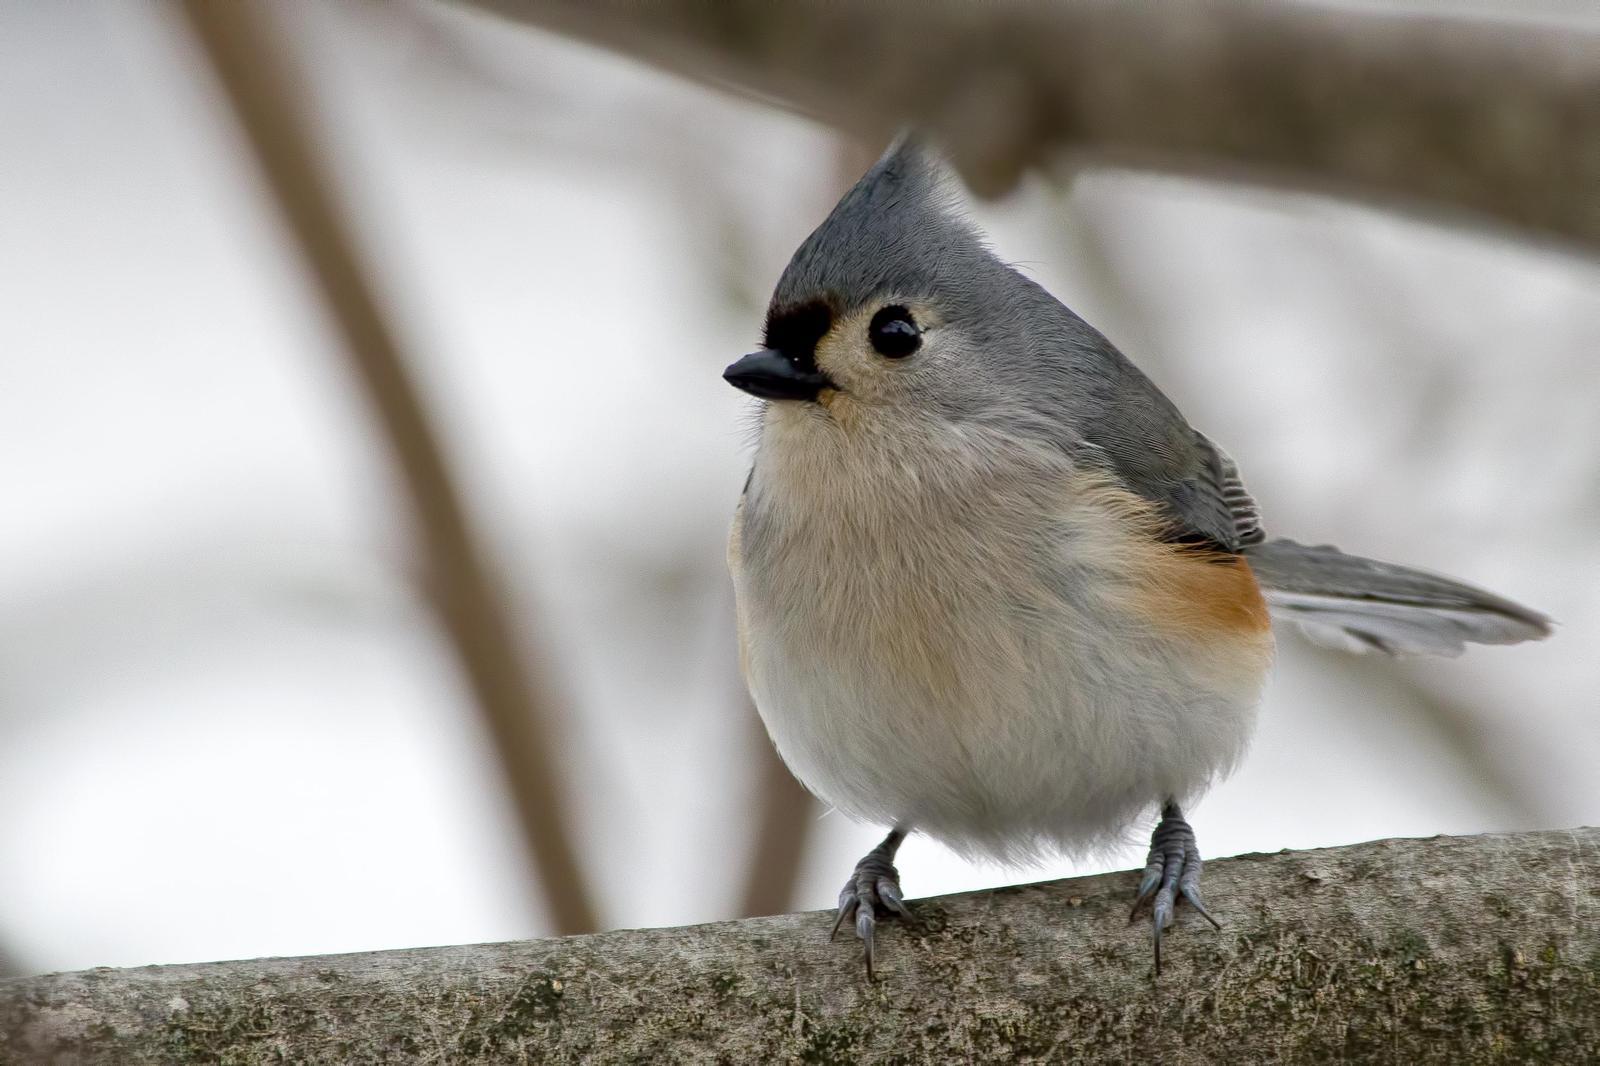 Tufted Titmouse Photo by Rob Dickerson